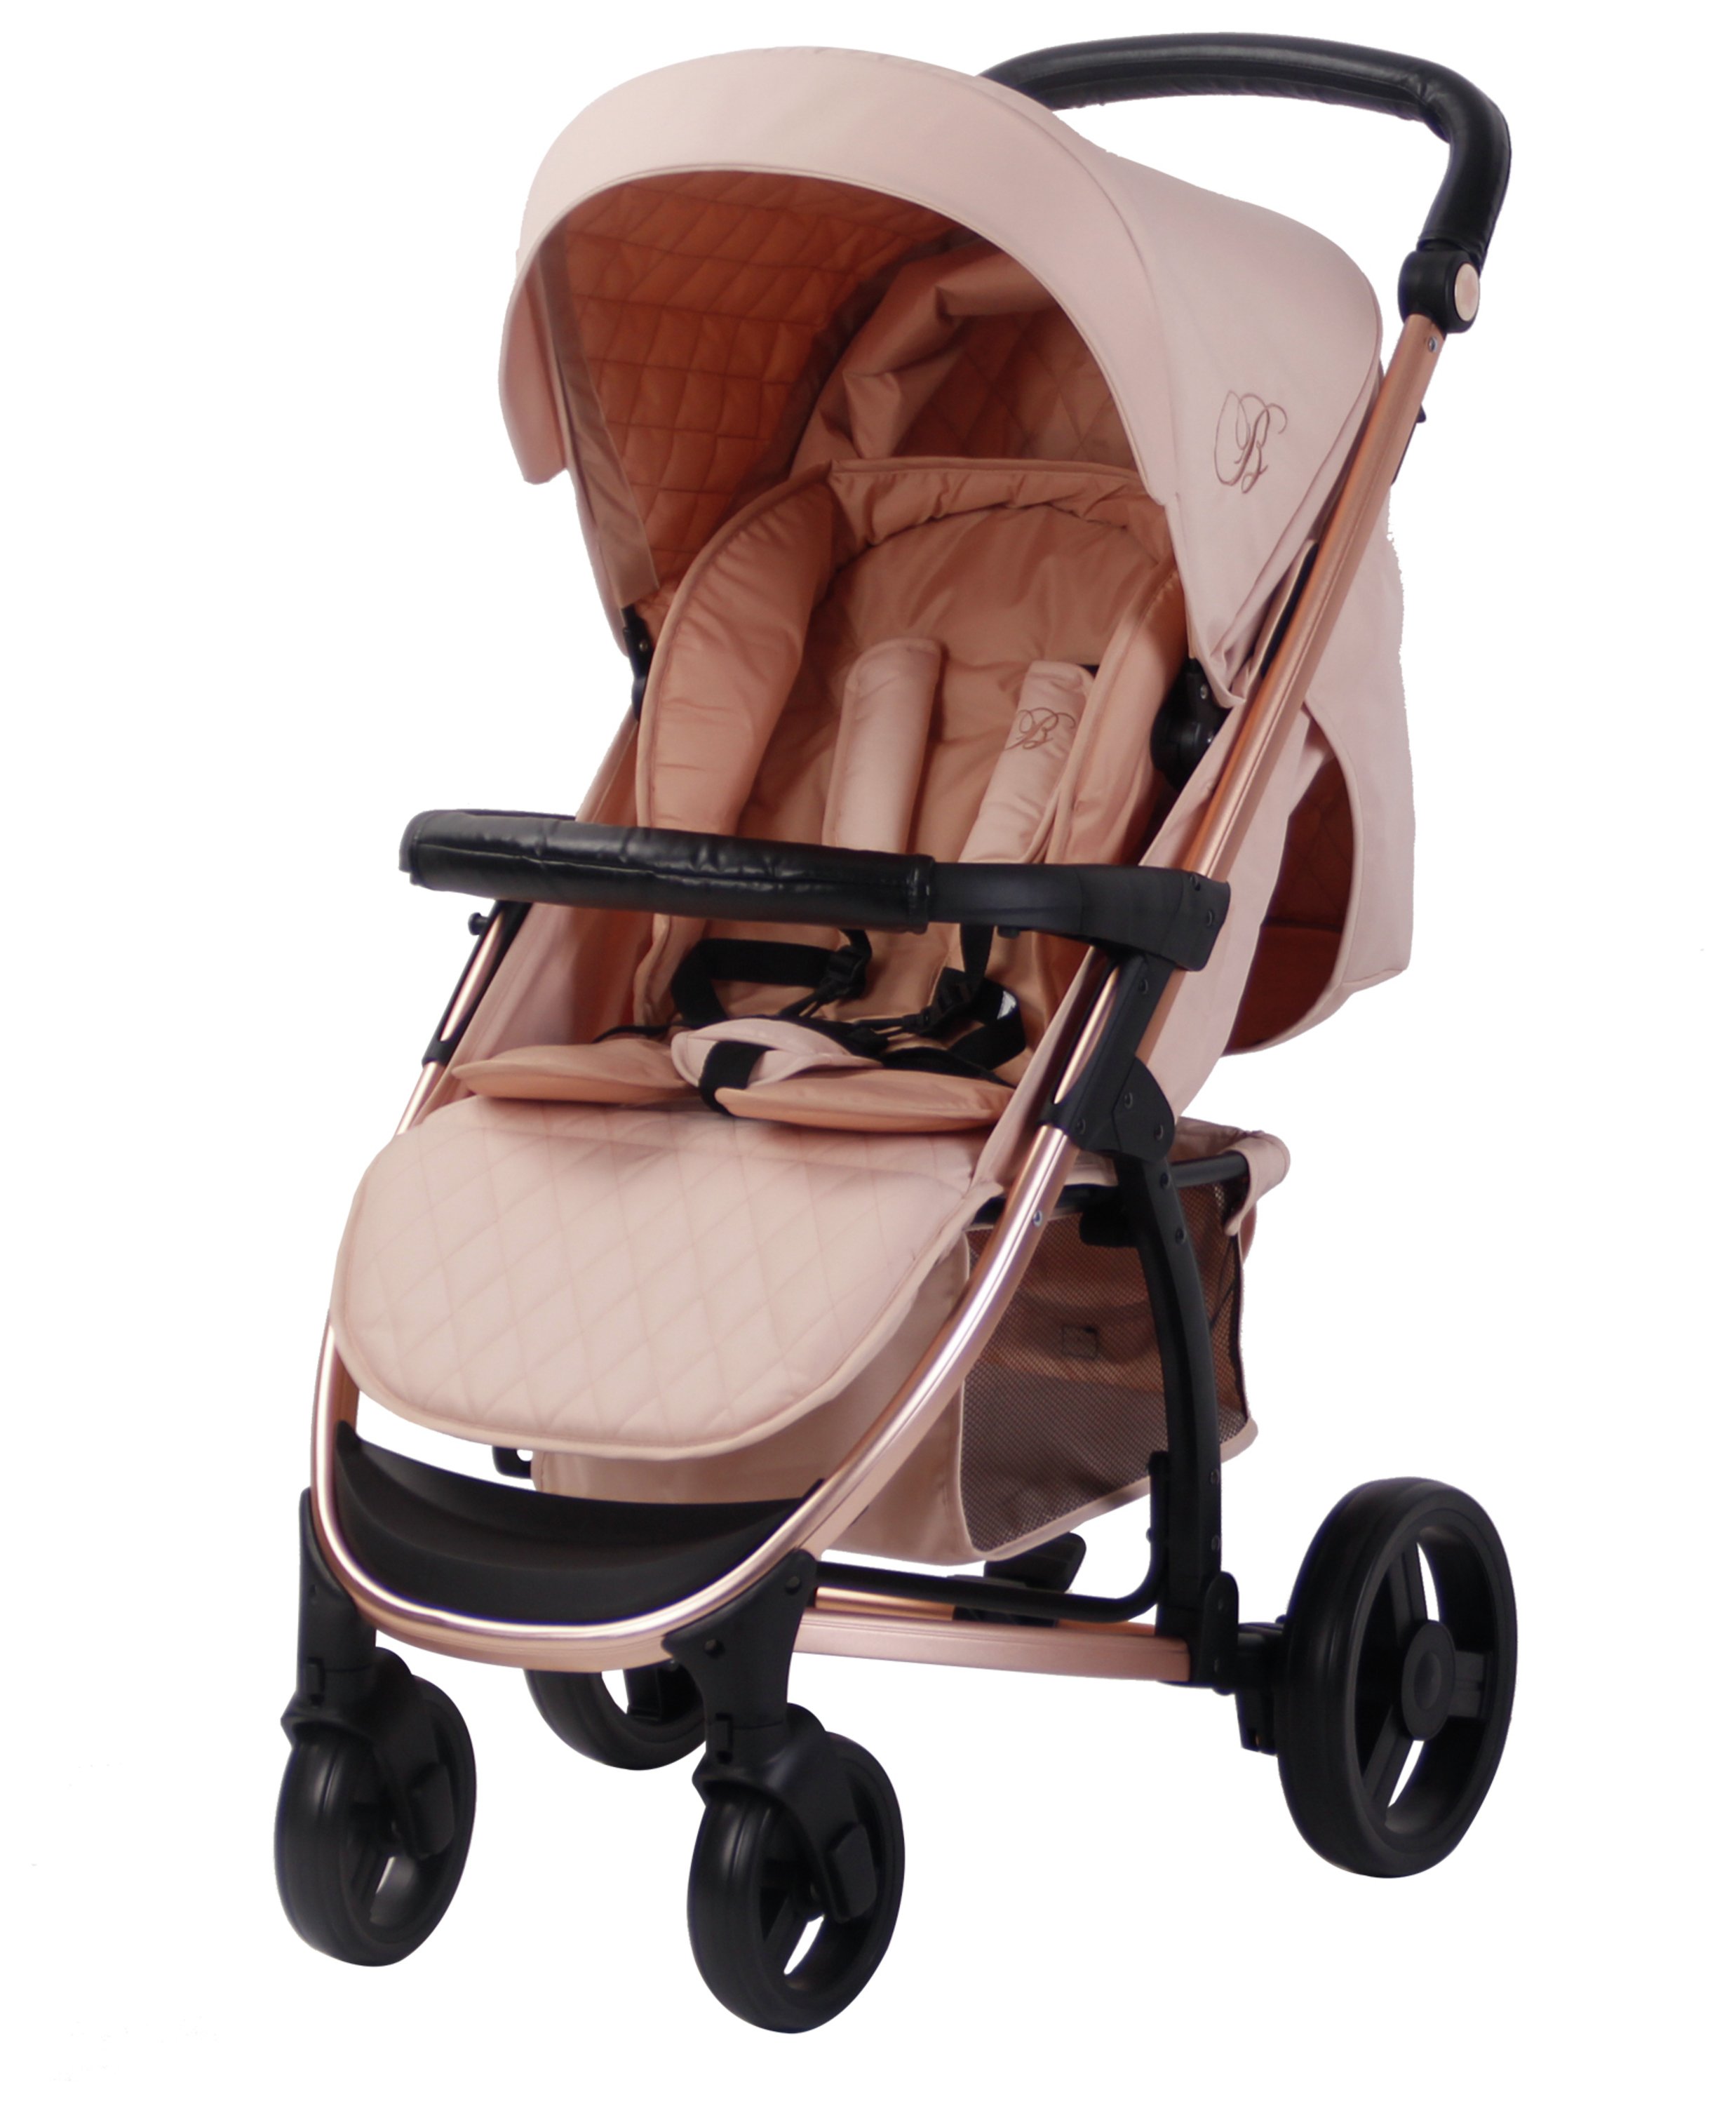 baby stroller three in one